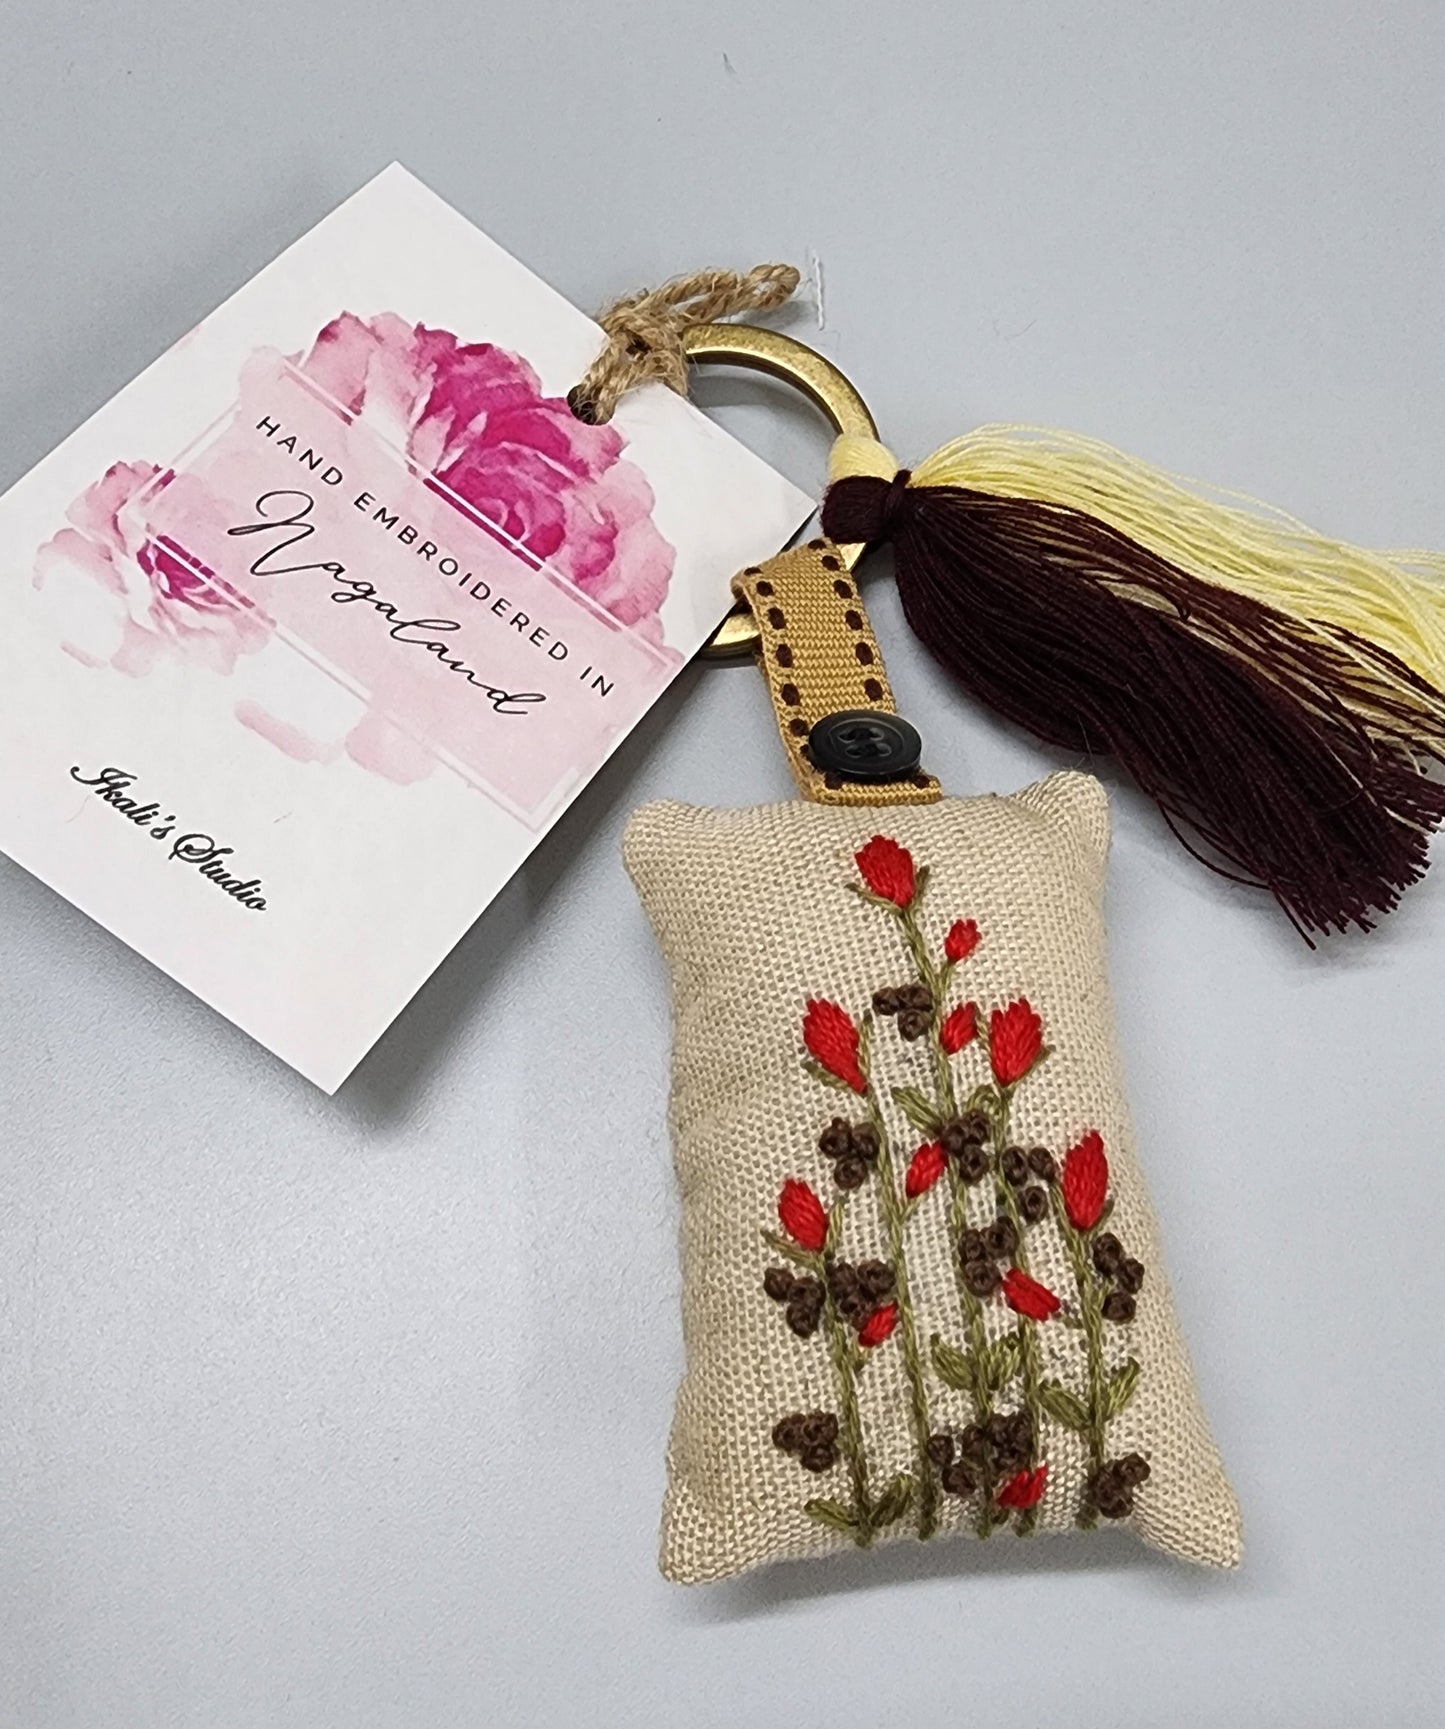 Ikali - Floral - Hand-embroidered Keychain